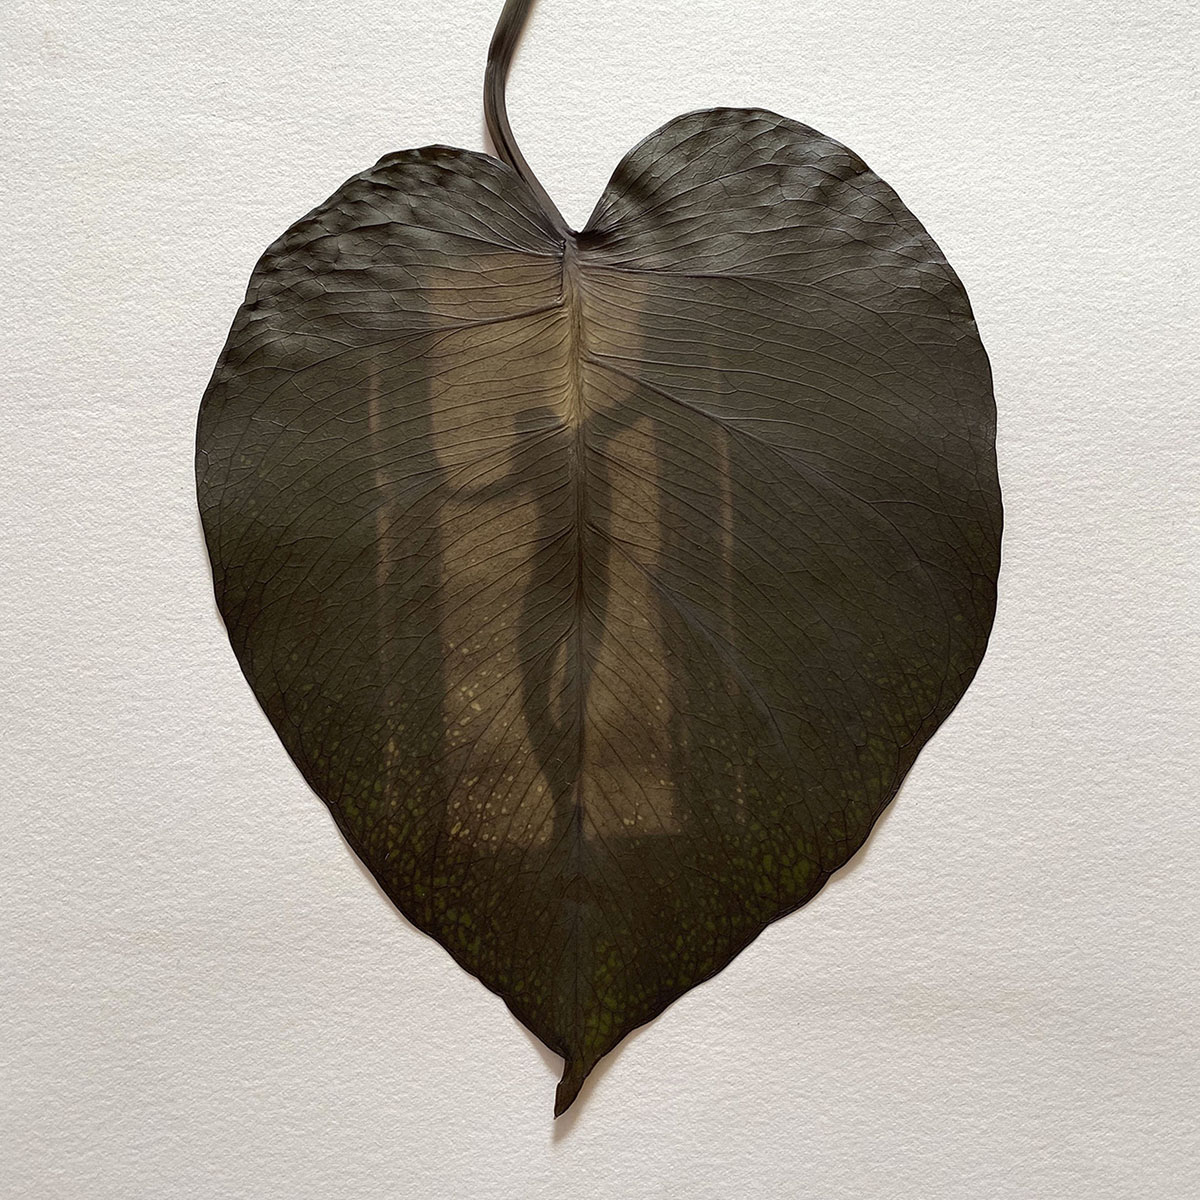 heart leaf with a person standing